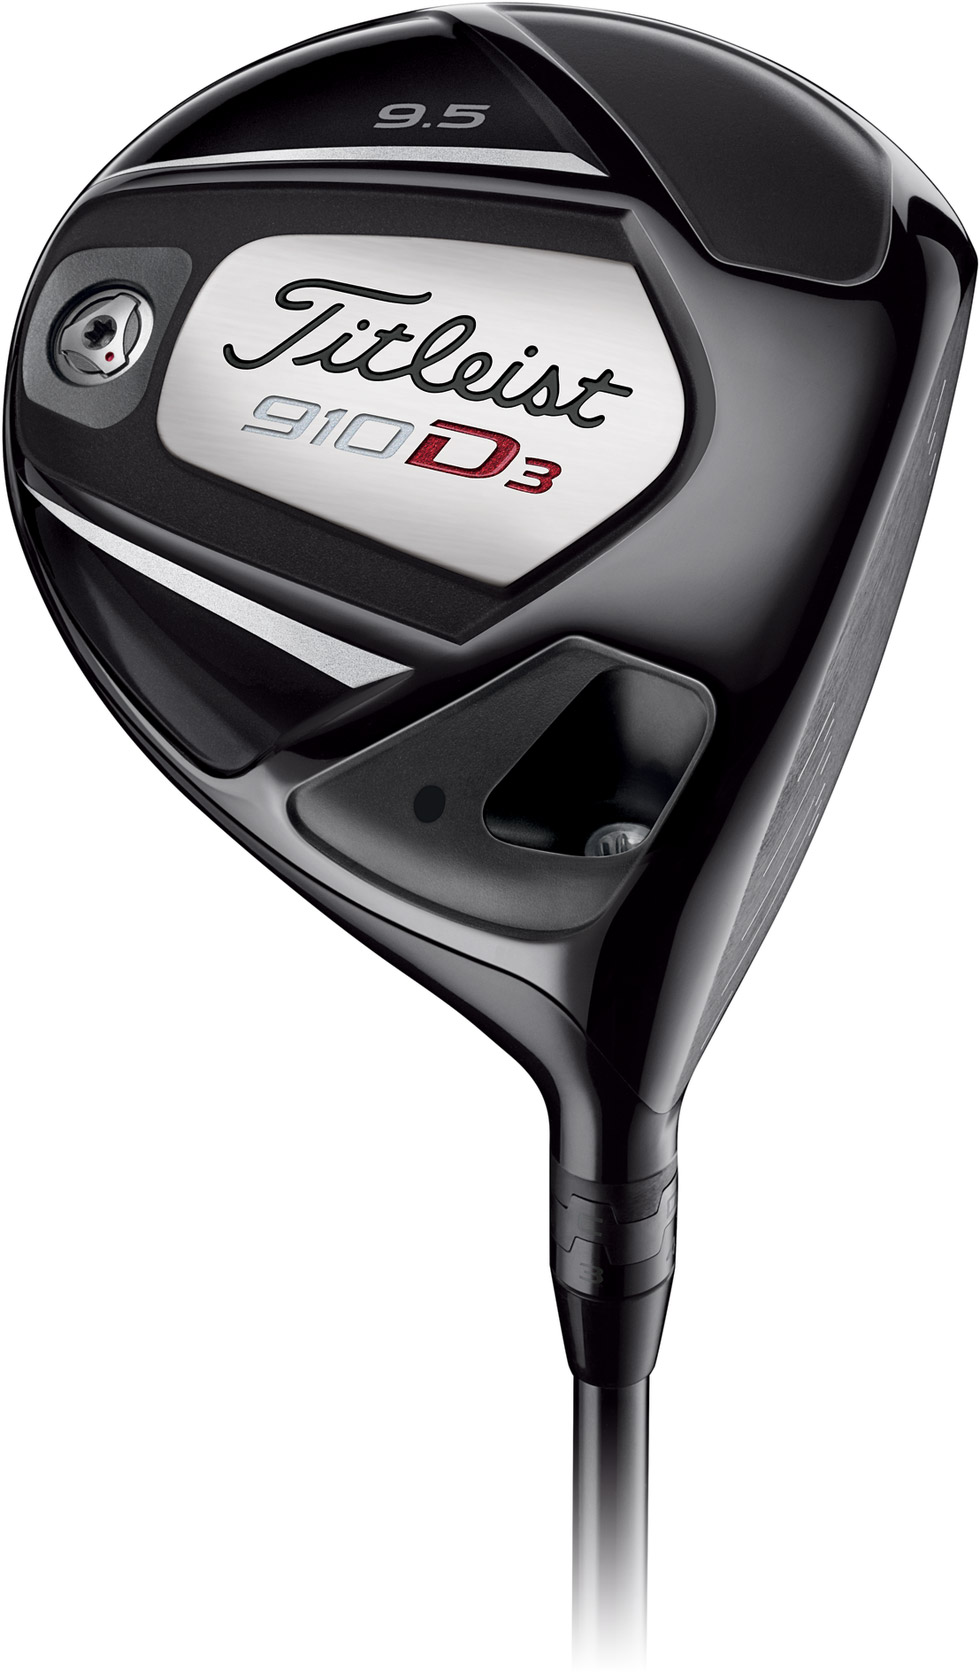 Titleist Introduces 910 Drivers - First Adjustable Models from Titleist (Bag Drop)